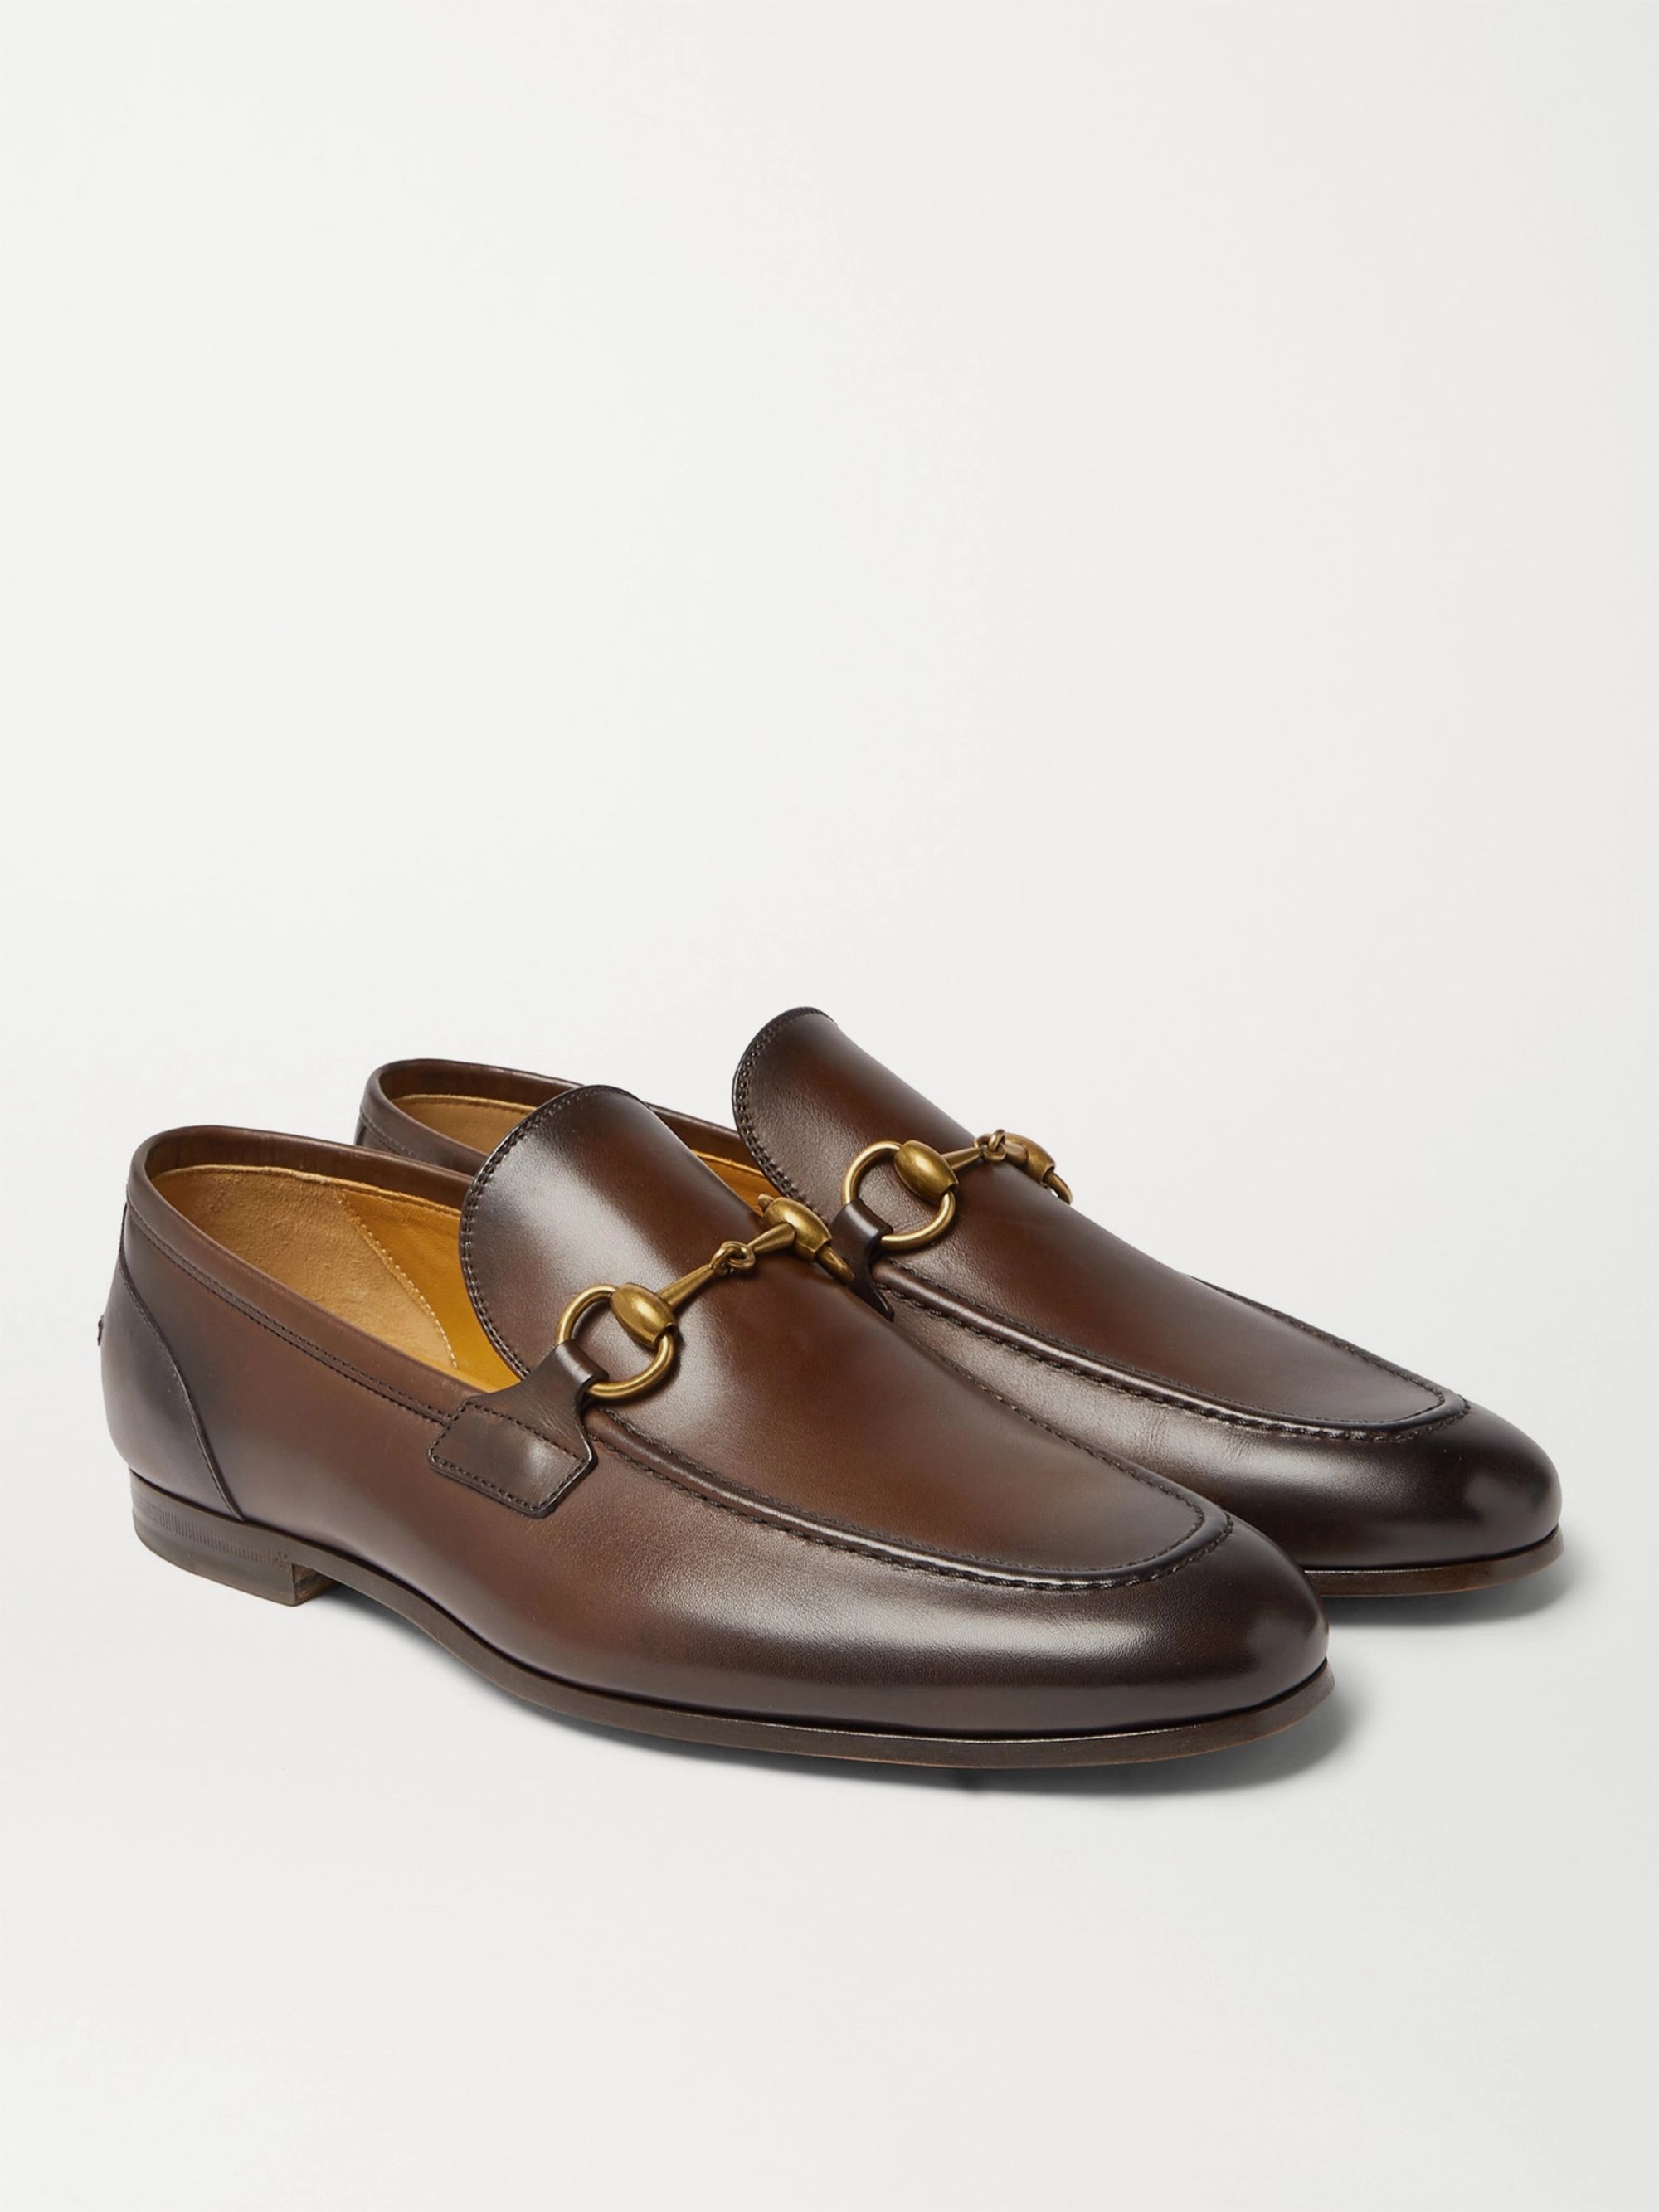 mens gucci brown loafers